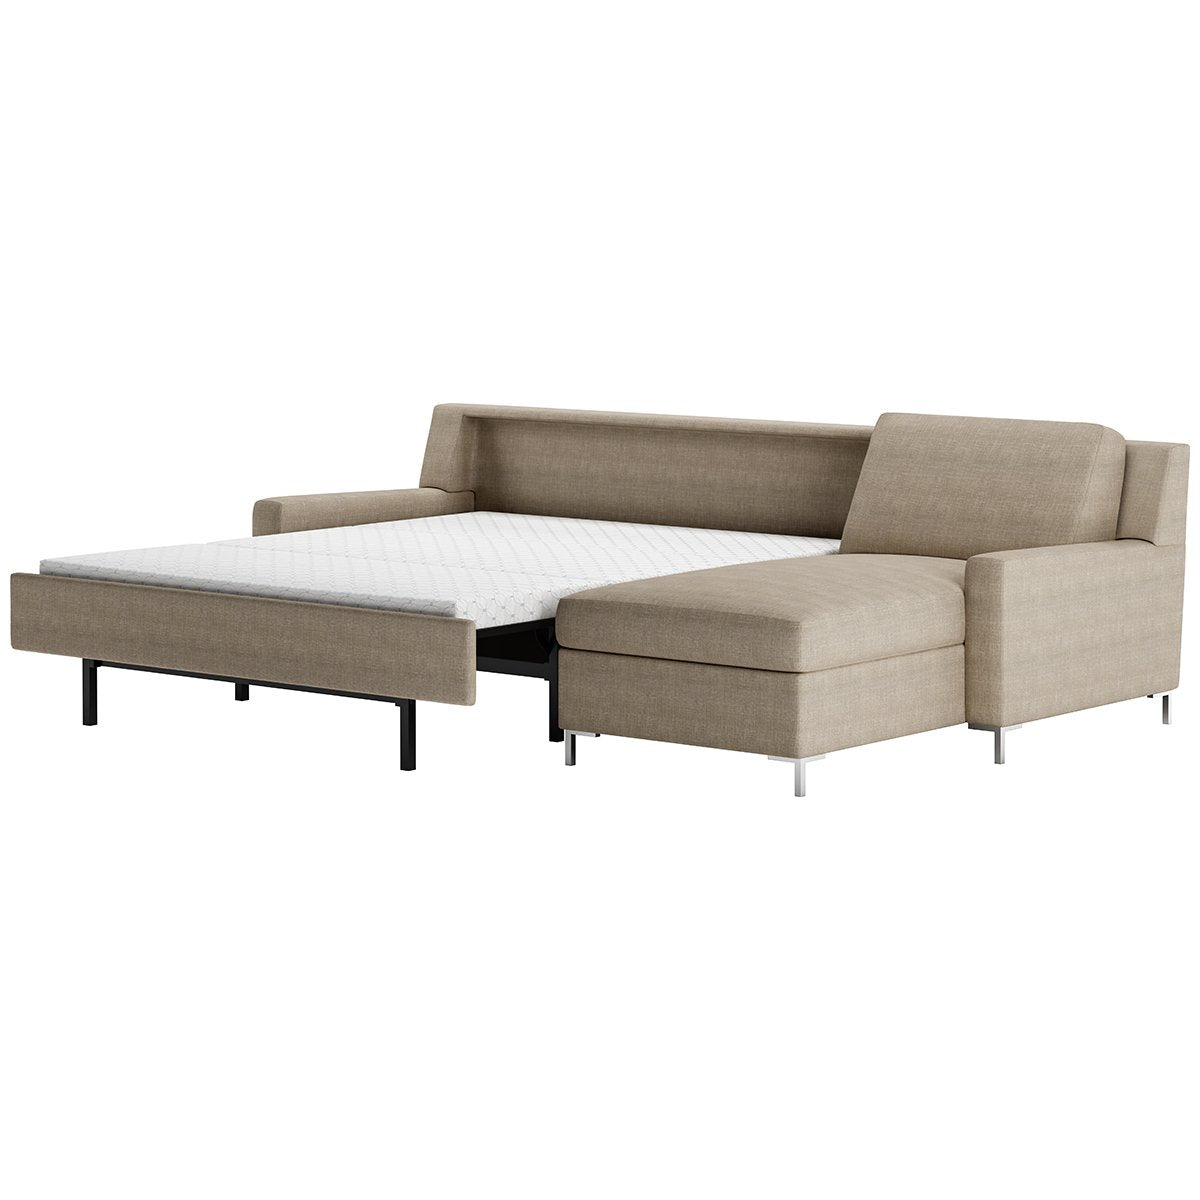 Bryson Upholstery Comfort Sleeper by American Leather